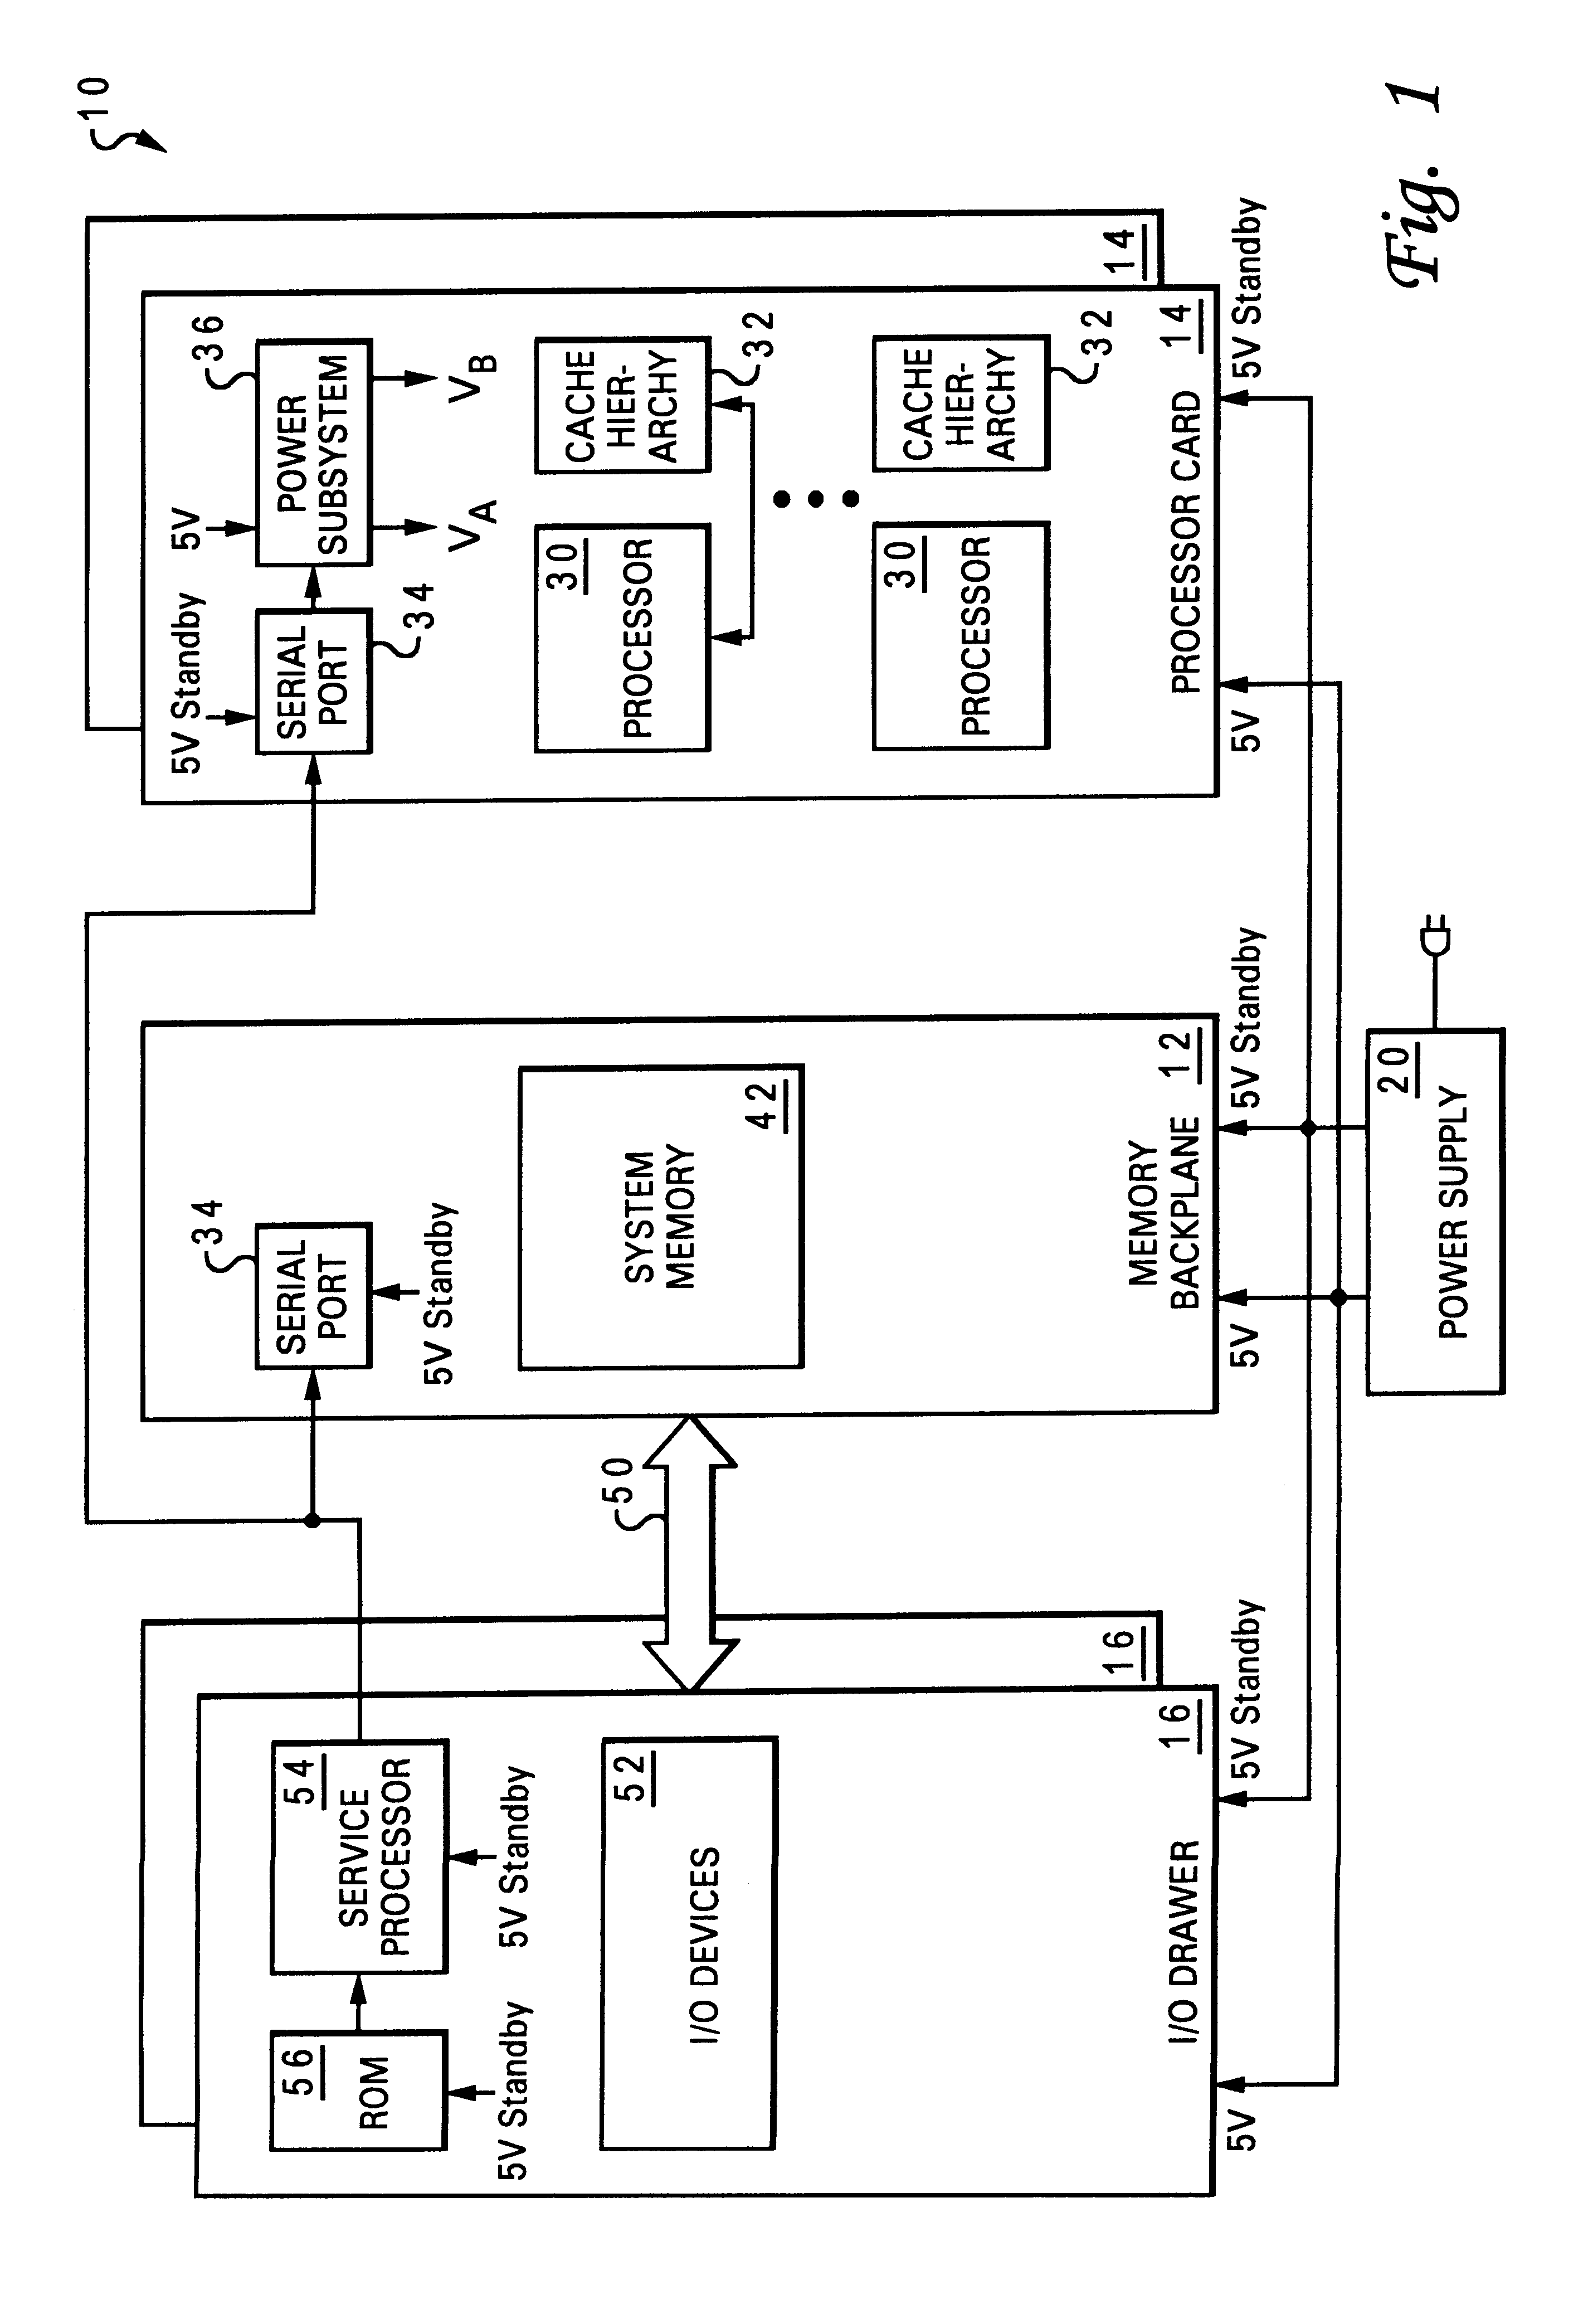 Power sequencing in a data processing system